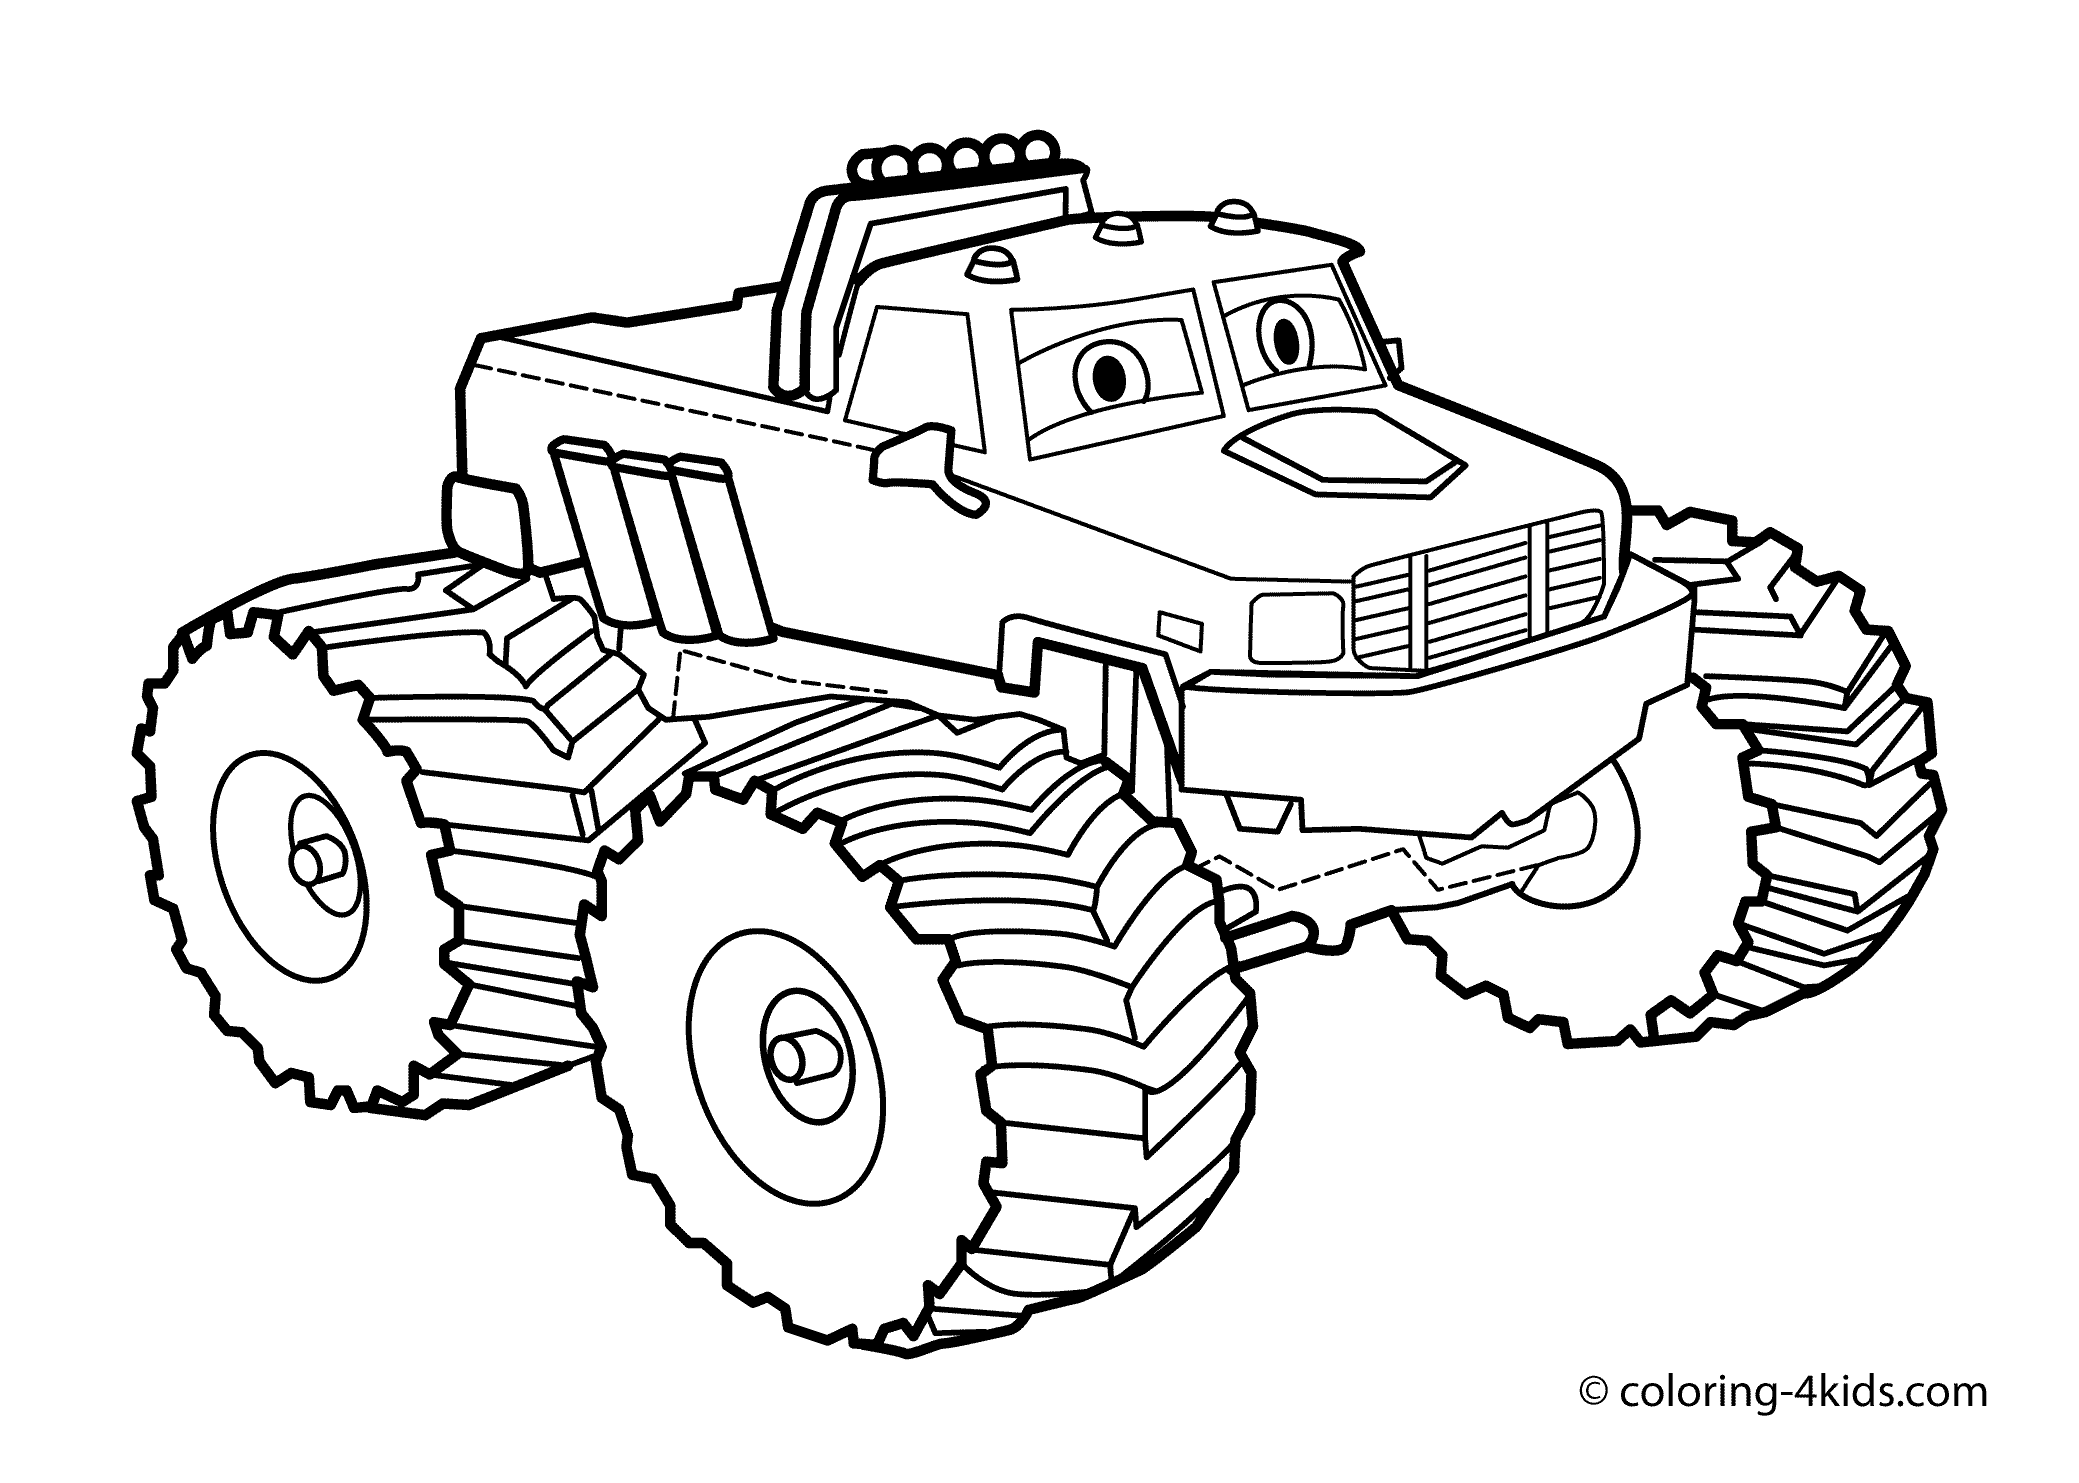 Truck Coloring Pages - Koloringpages